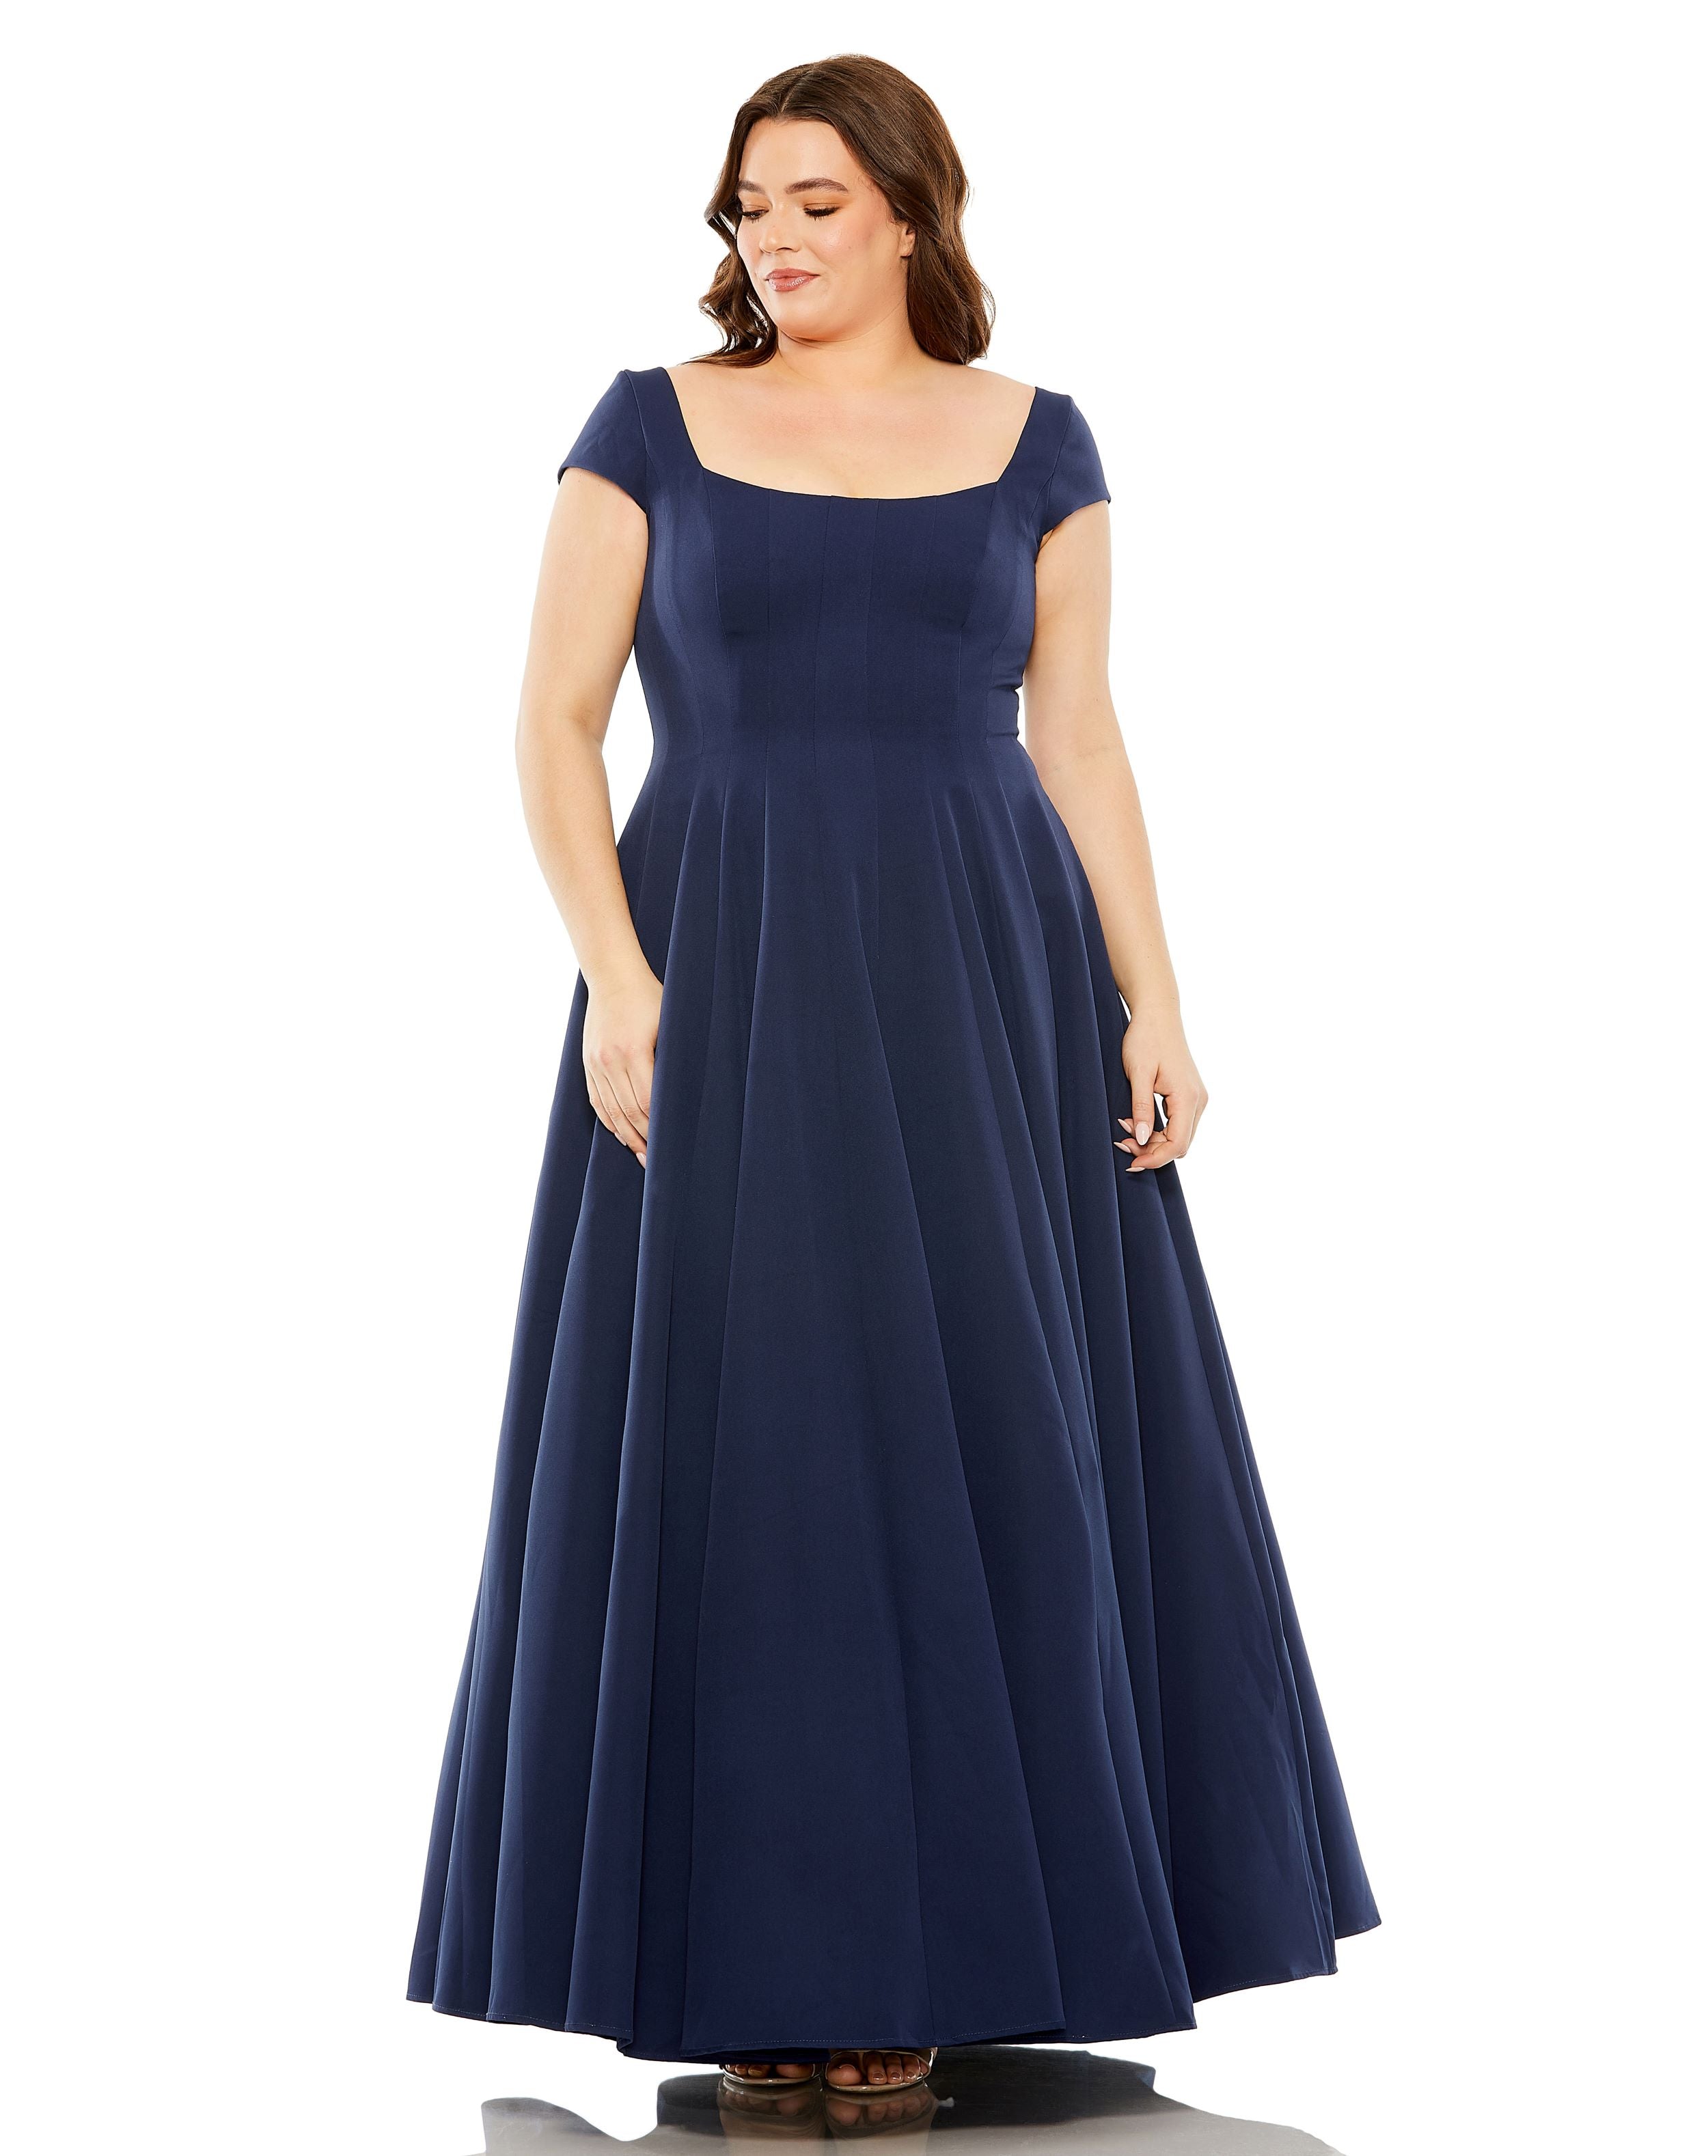 Cap Sleeve Square Neck Ball Gown